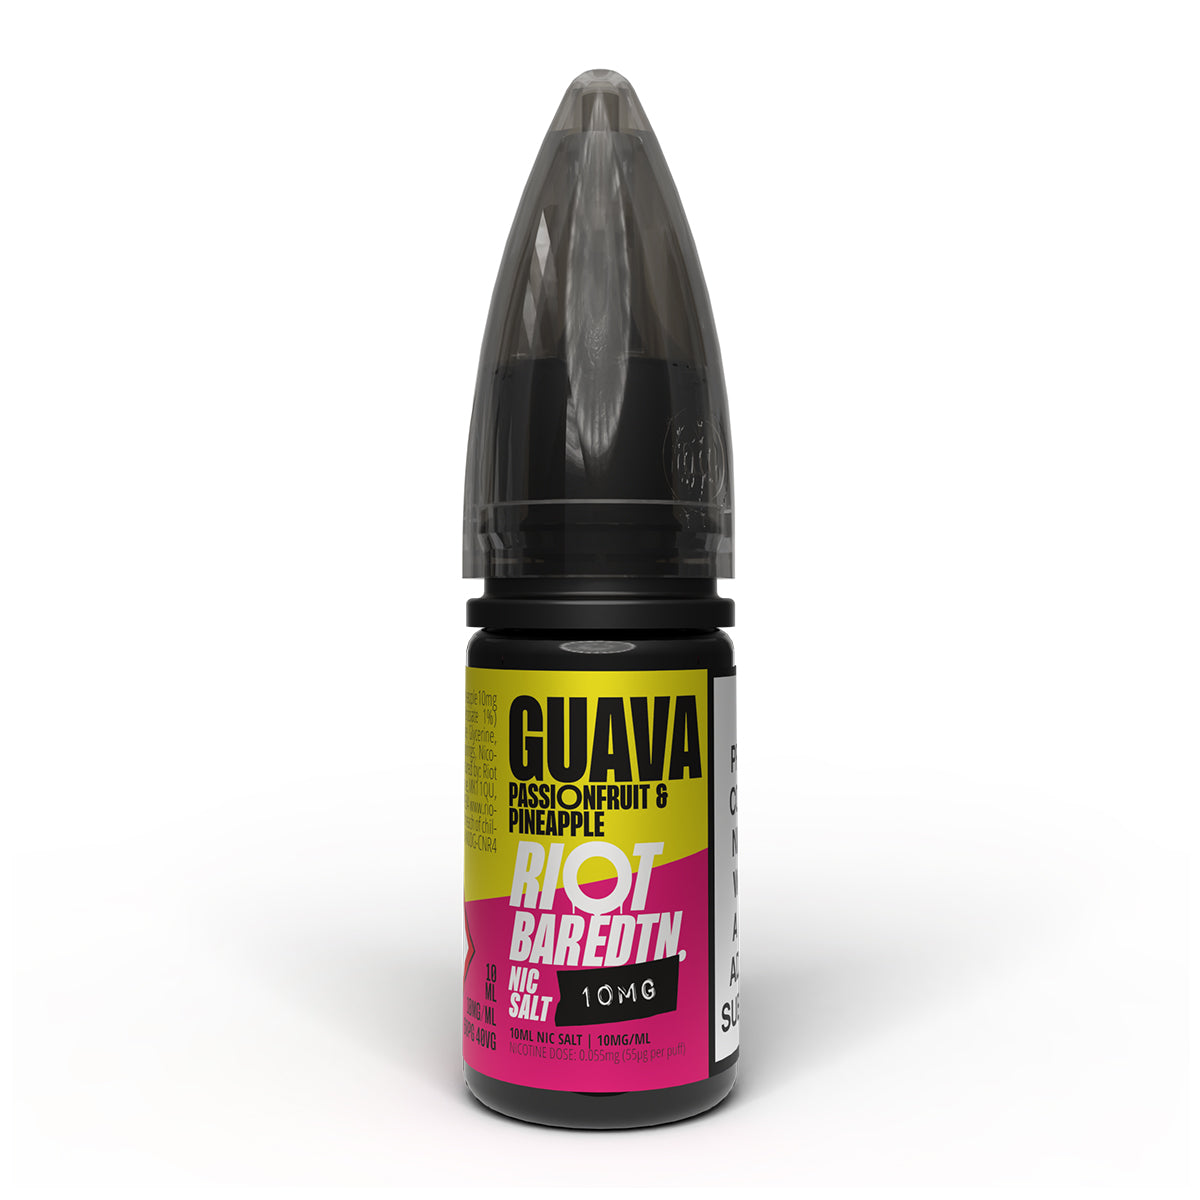 Guava Passionfruit & Pineapple 10ml Nicotine Salt 10mg by Riot Bar Edtn